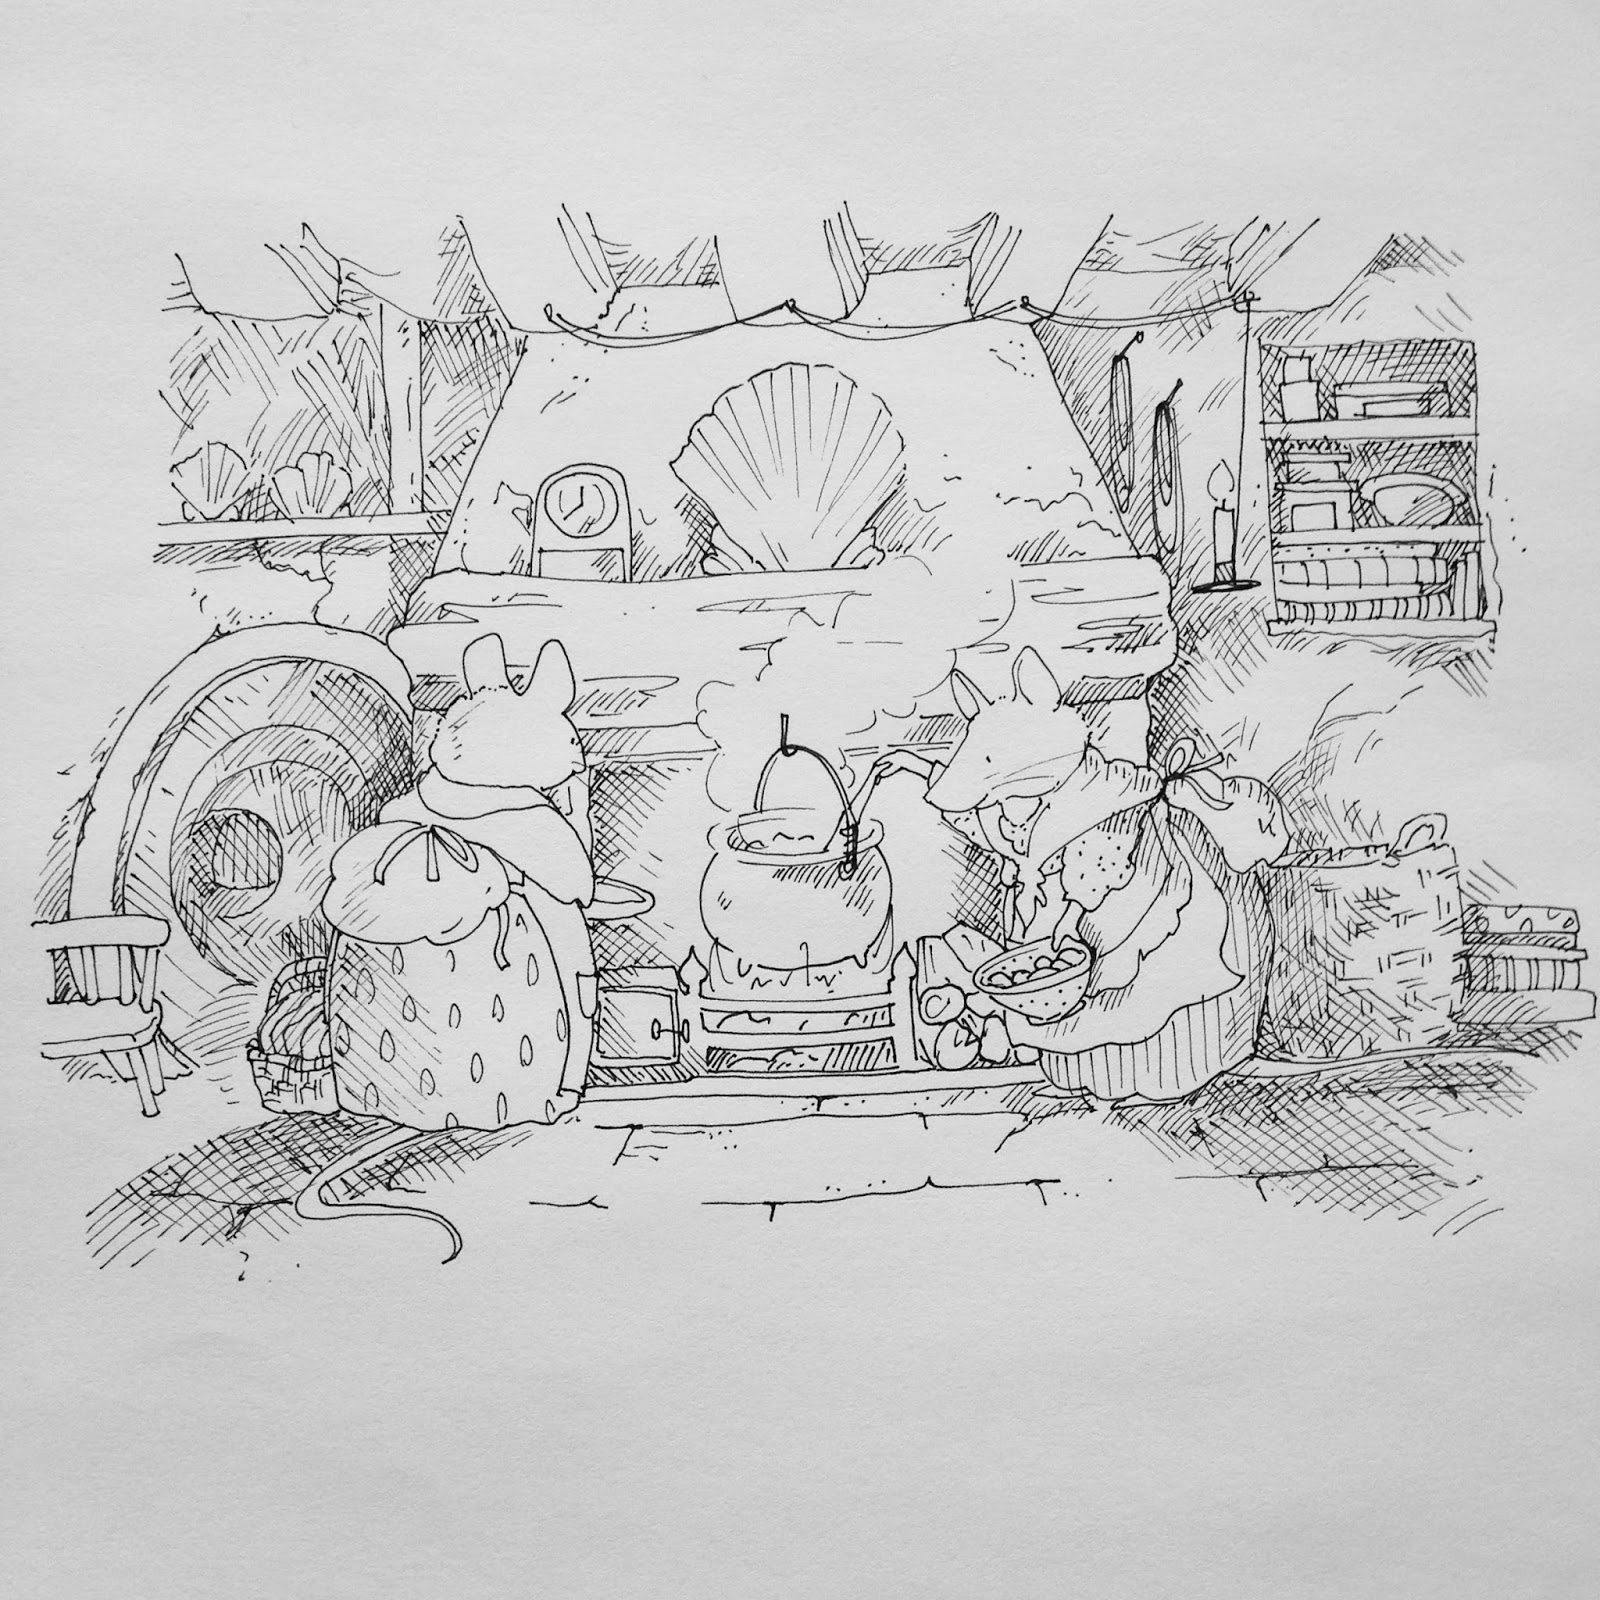 Meadow to Grove: Drawing from Brambly Hedge